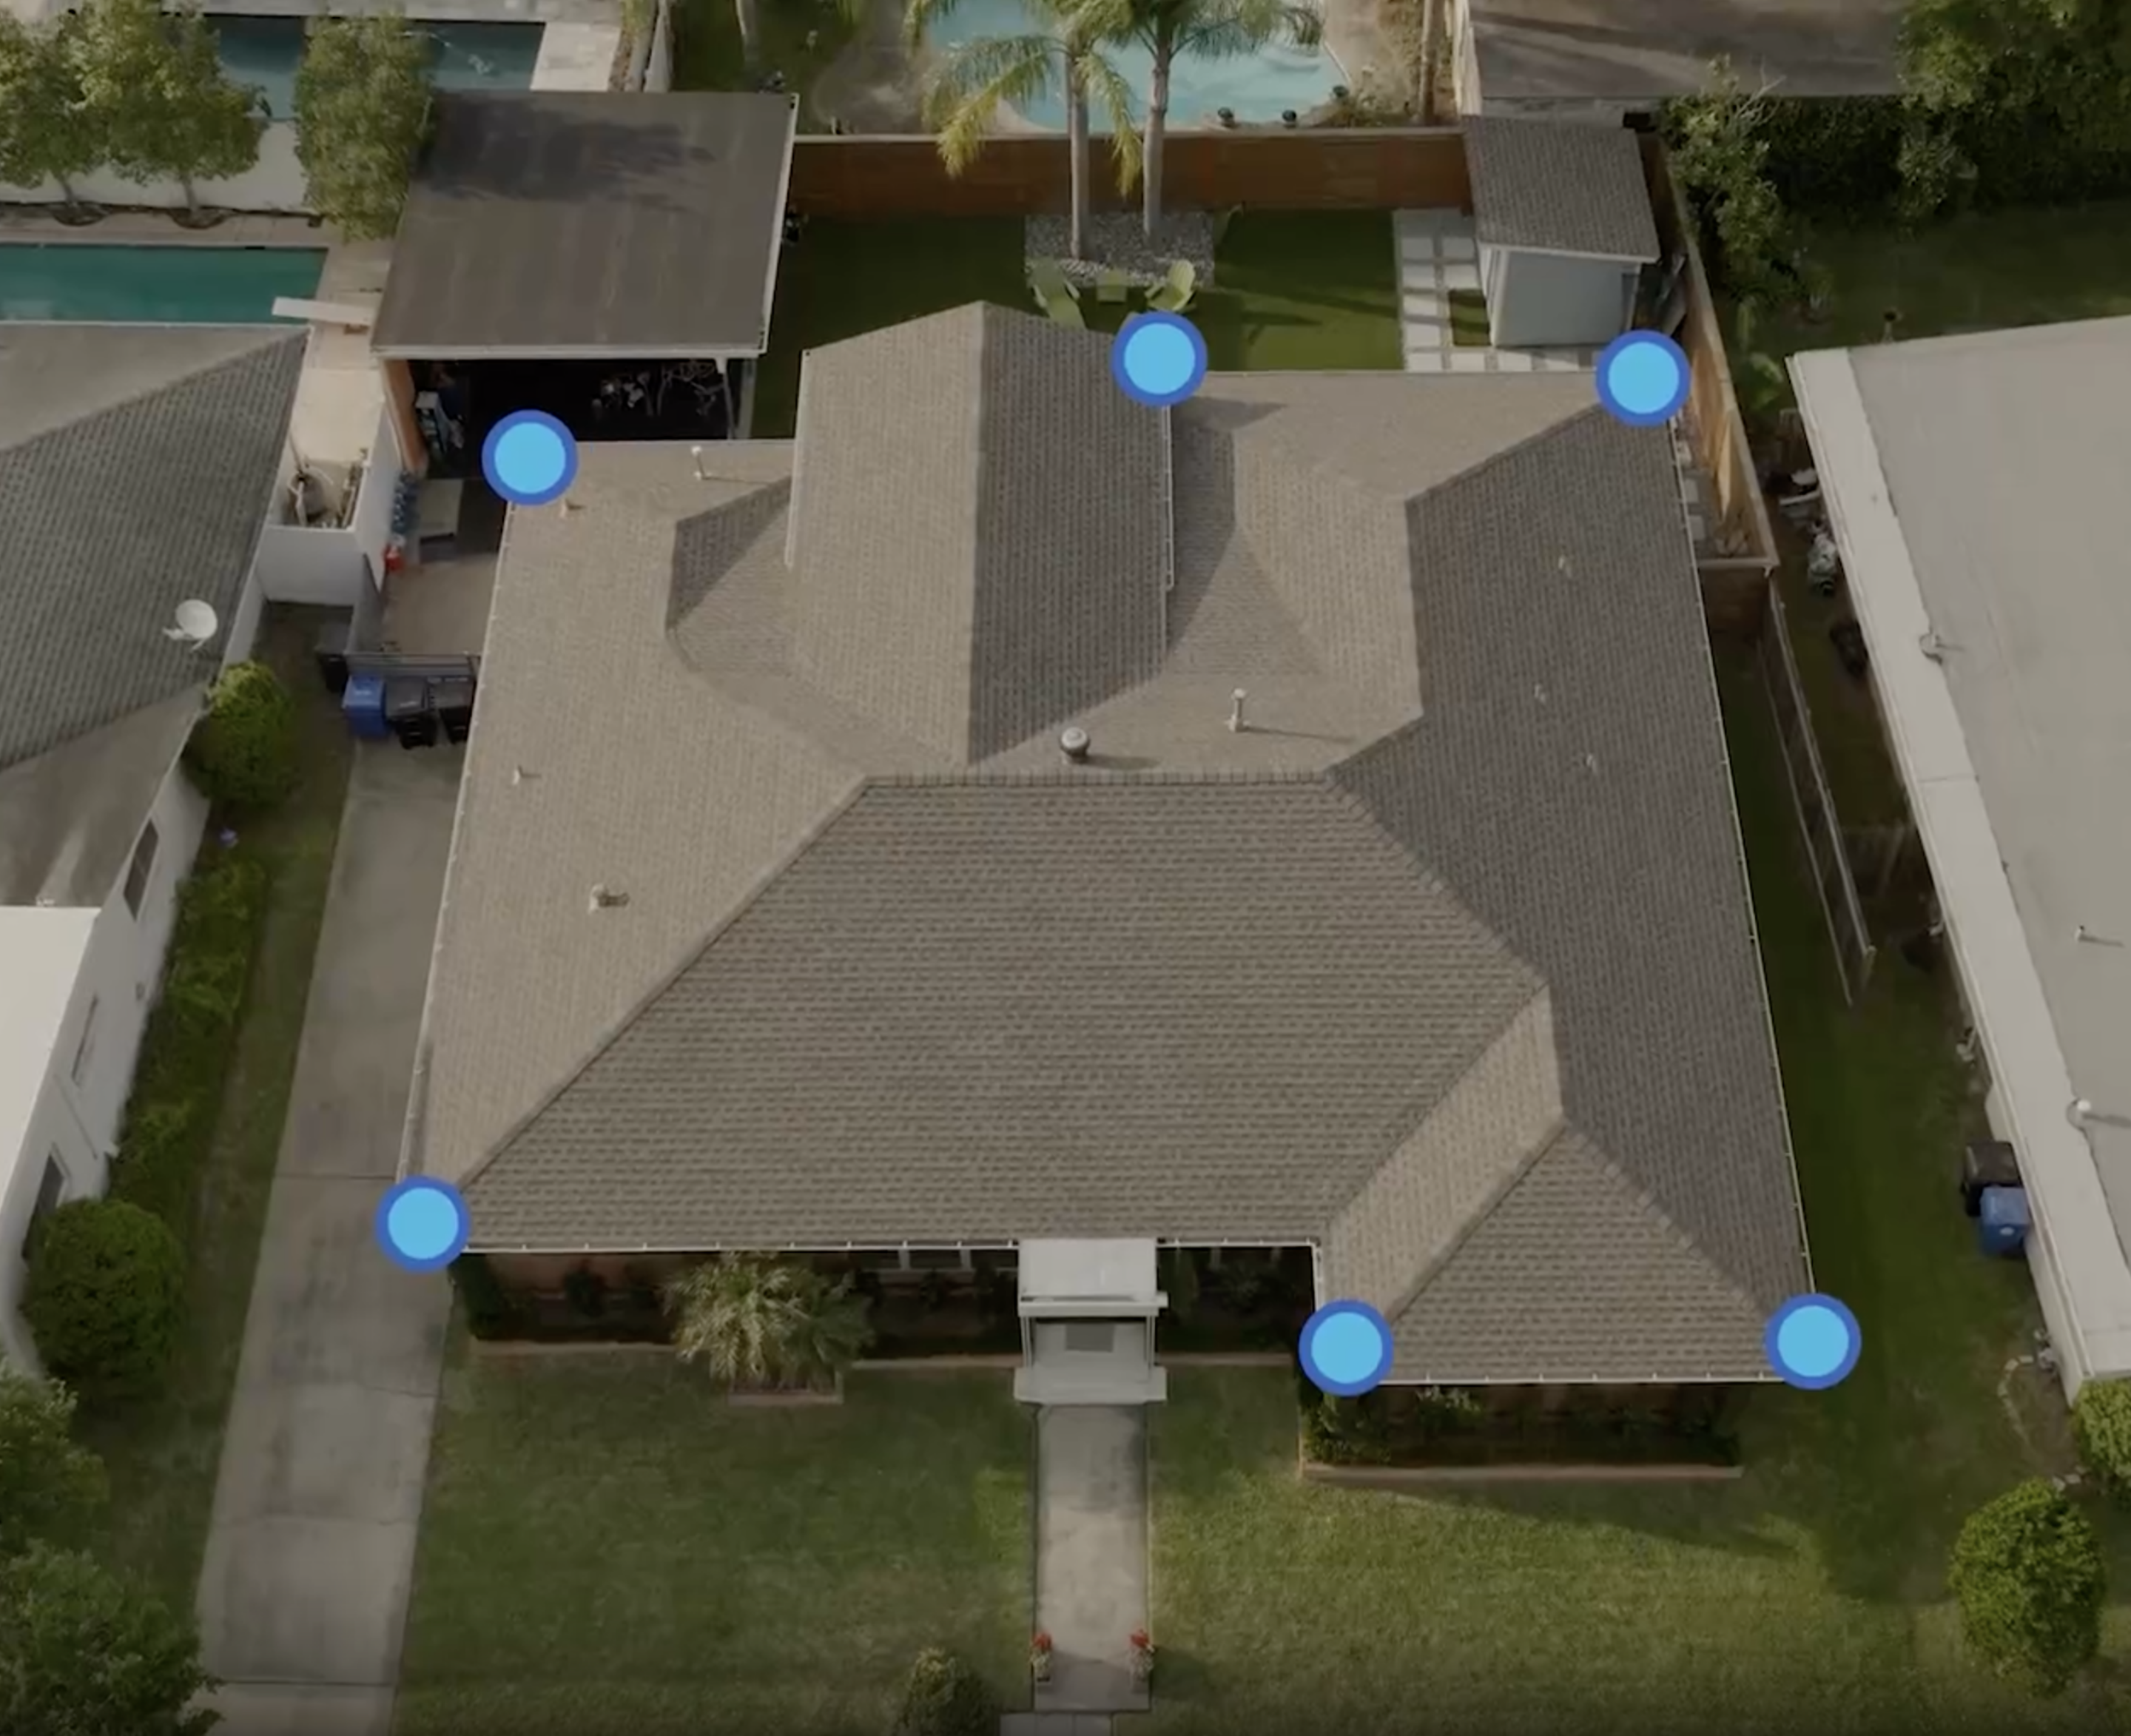 birds eye view of house that shows the placement of all security cameras